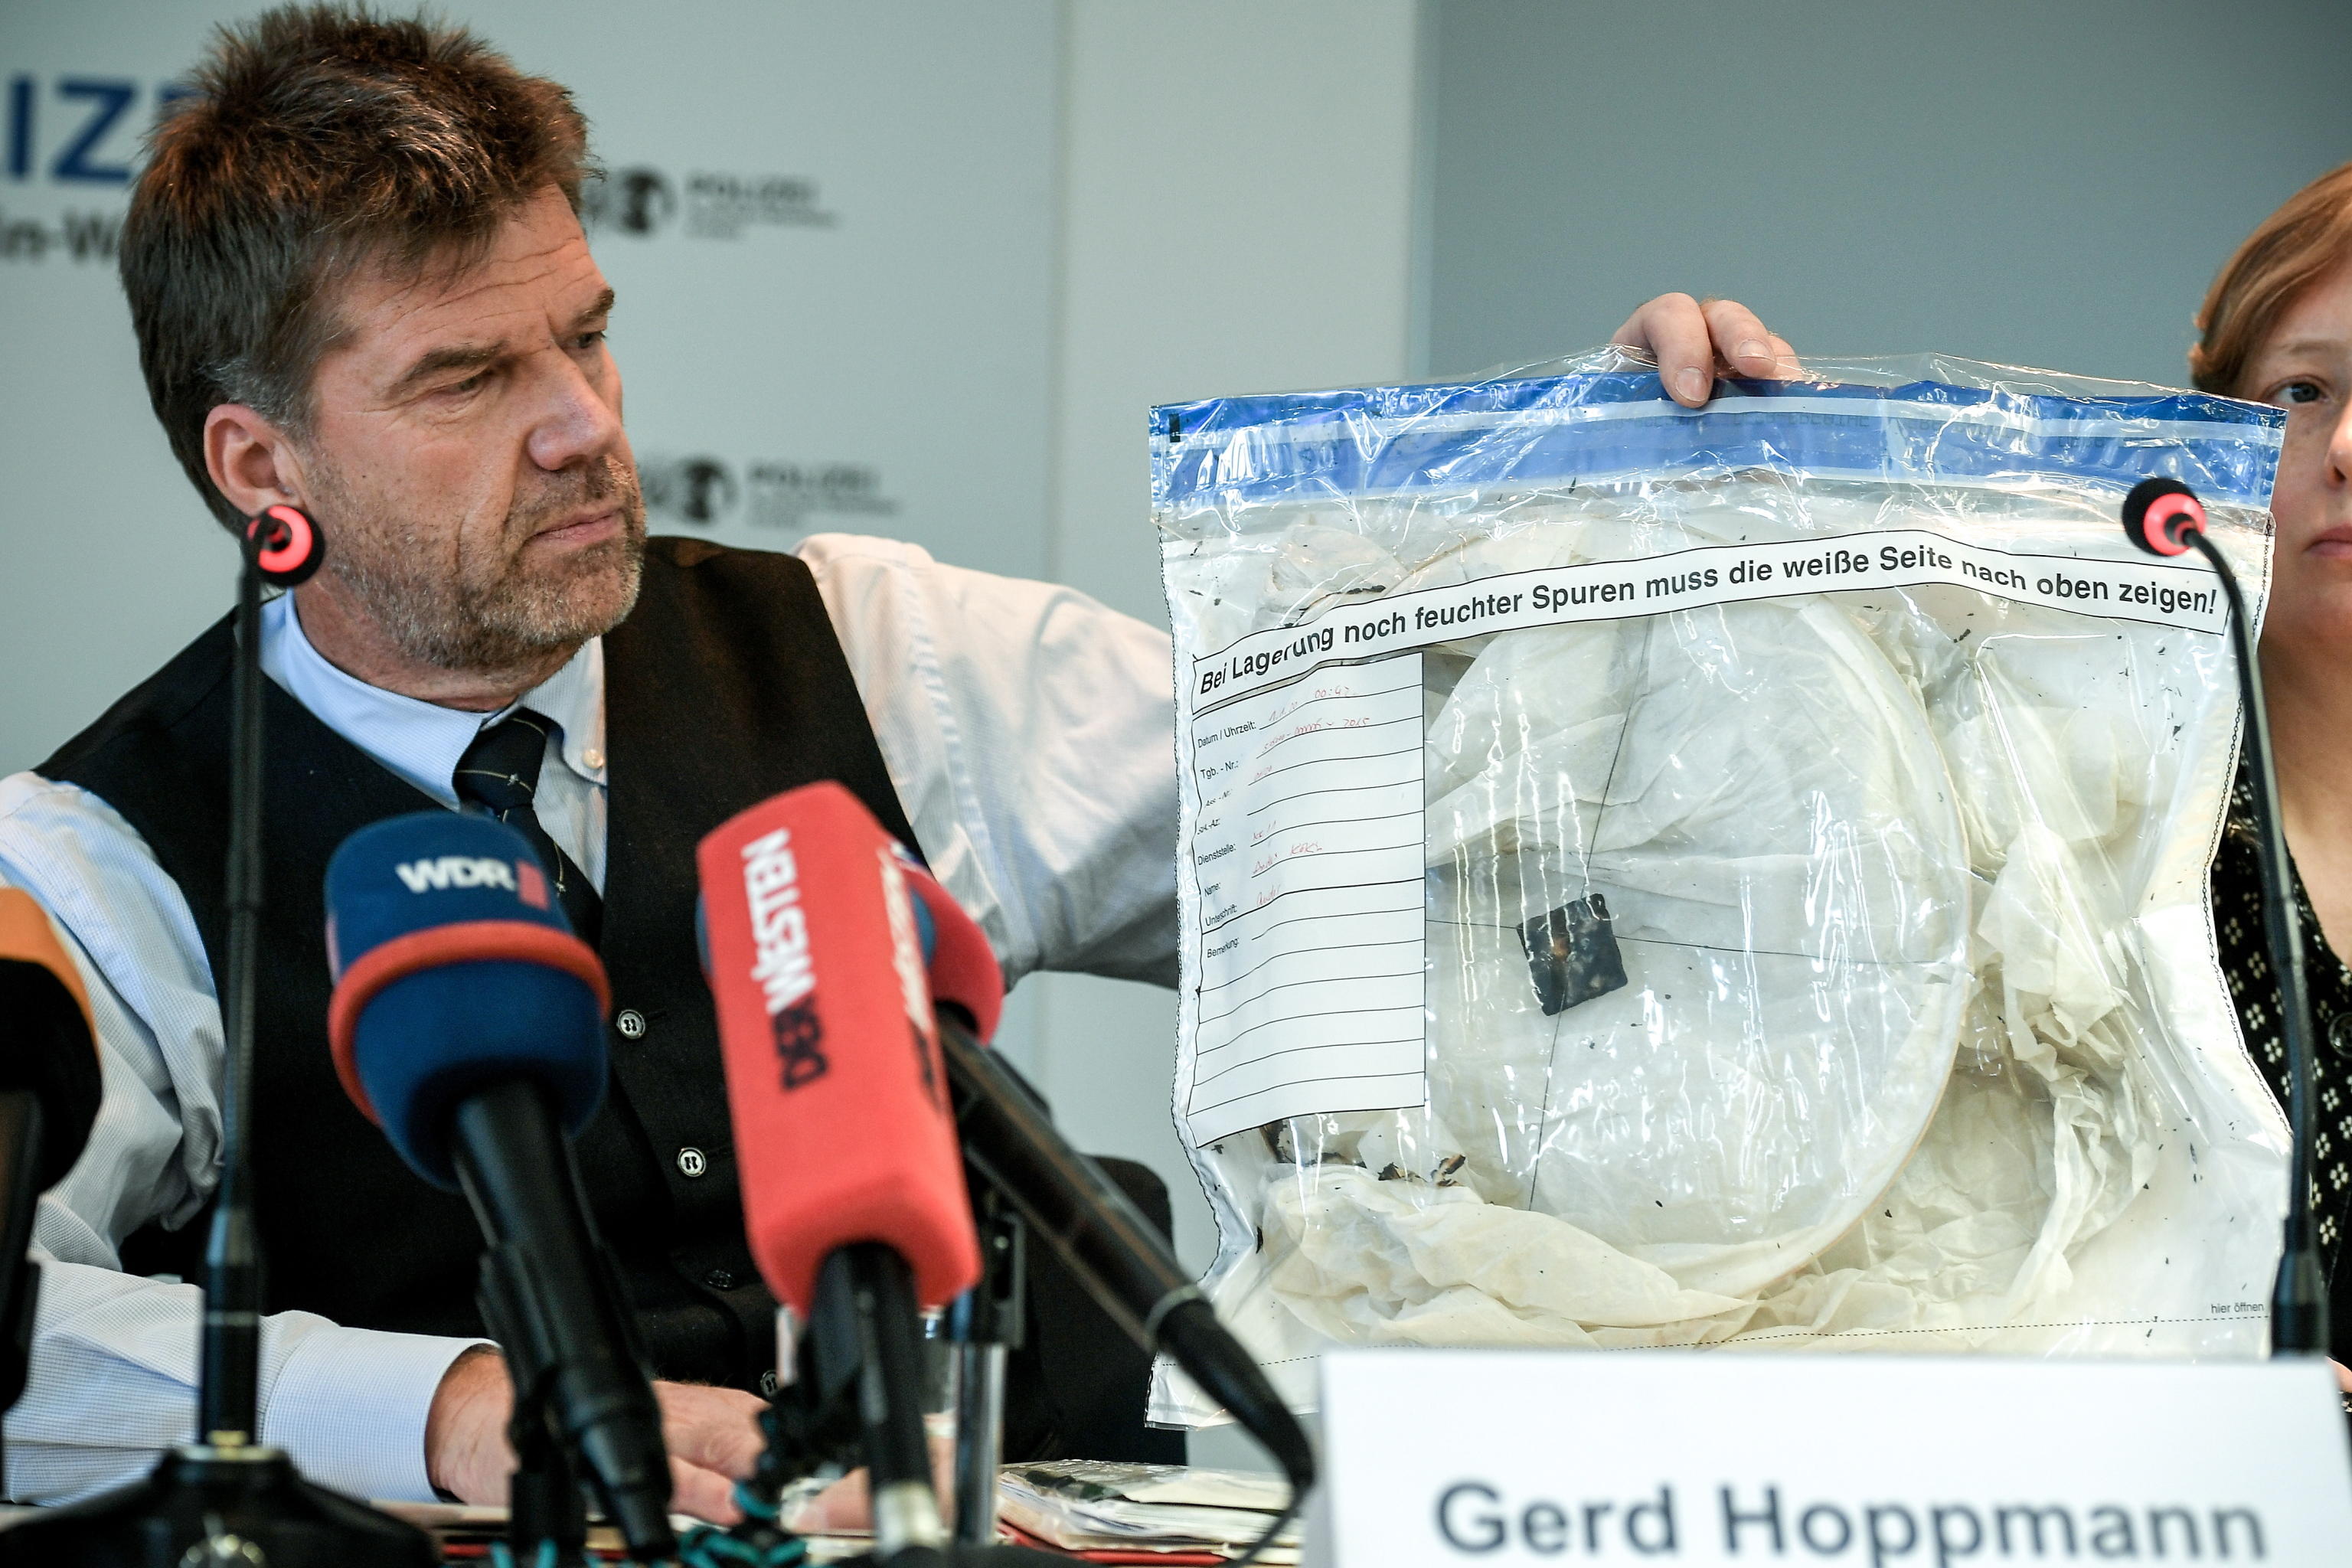 epa08098534 Gerd Hoppmann, head of the Krefeld investigation commission, shows a so-called sky lantern, which has set the monkey house of the Krefeld Zoo on fire in the New Year's night, during a press conference in Krefeld, Germany, 02 January 2020. All animals, in total more than 30, died during the fire at the Krefeld Zoo ape house in the New Year's night. The dead animals include orangutans, two older gorillas and a chimpanzee. Only a few hours after the fire disaster, possible perpetrators of the fire had contacted the police on New Year's Day. The sky lanterns that started the fire are prohibited in Germany. EPA/SASCHA STEINBACH